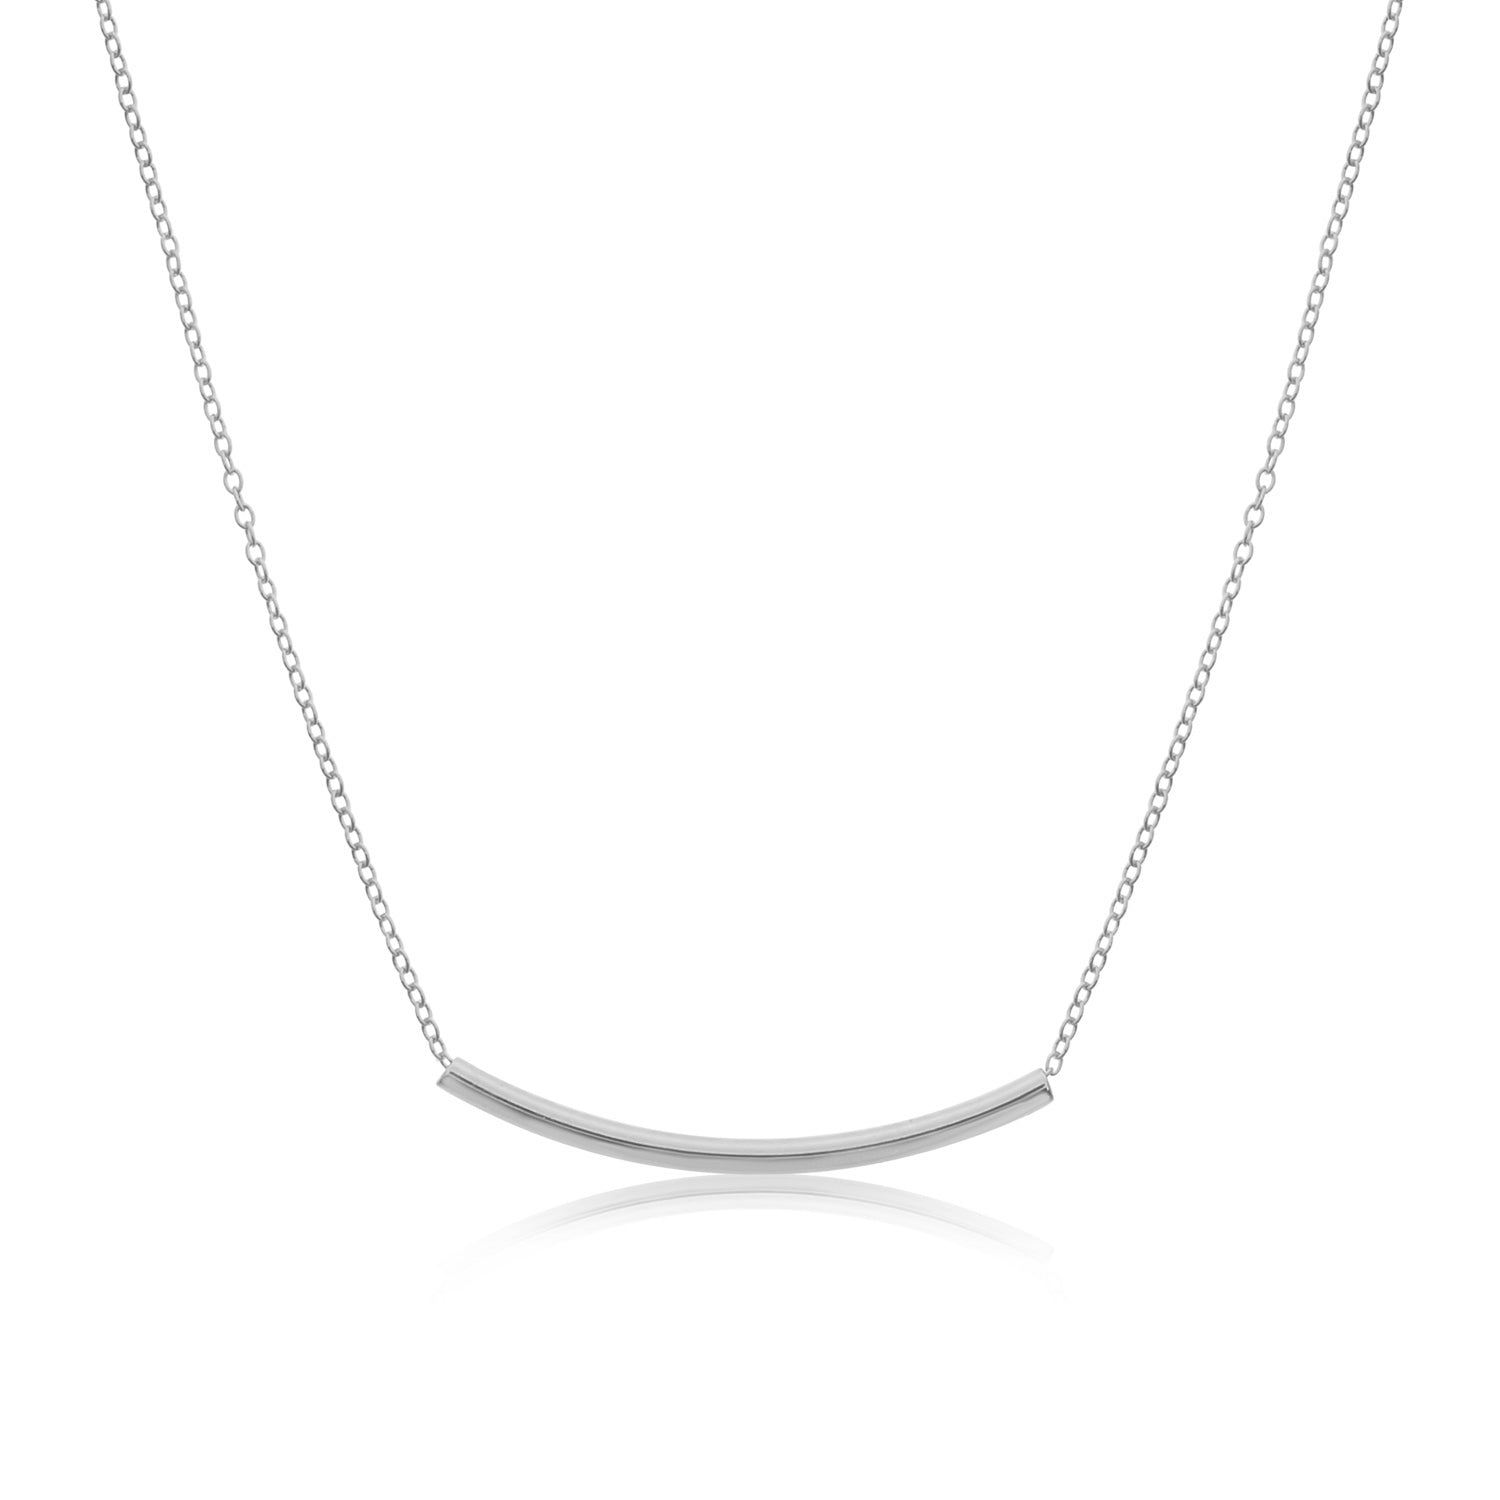 Sterling Silver Hollow Bar Necklace